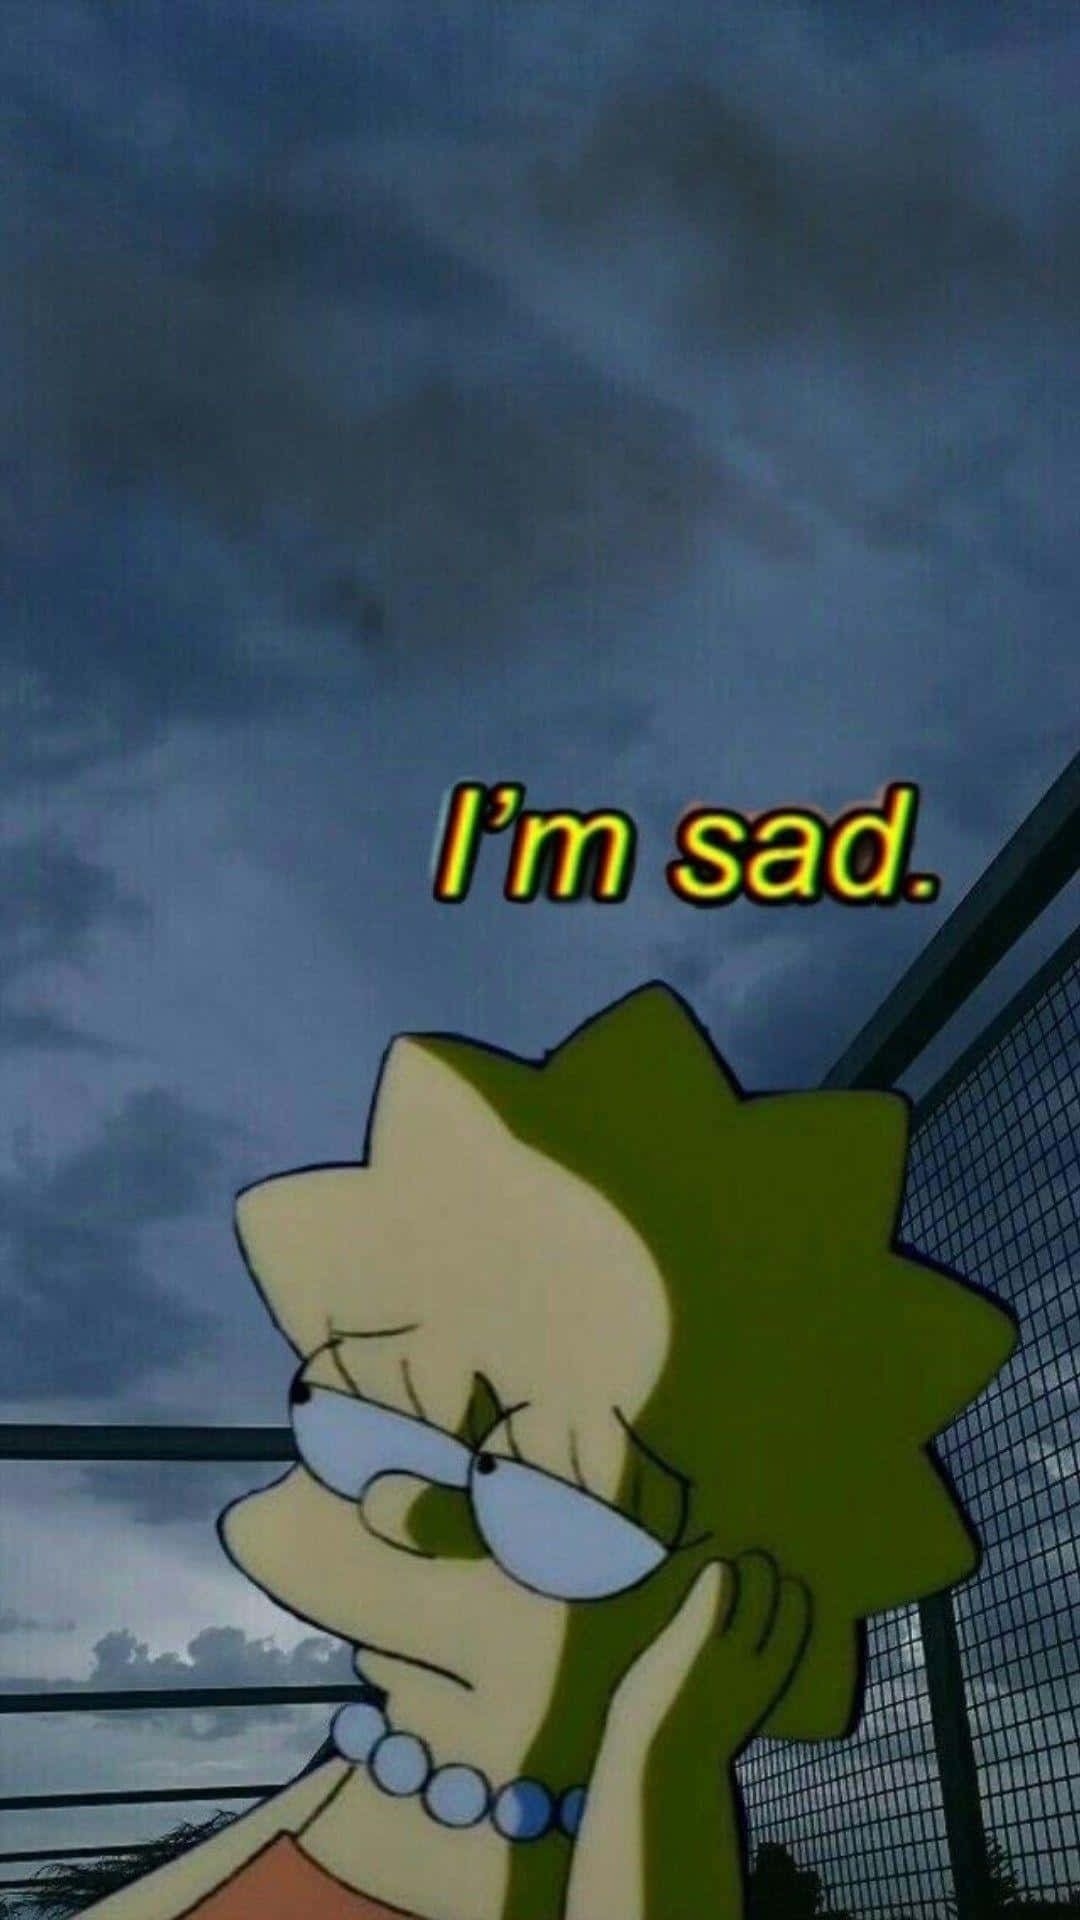 Sad Lisa Simpson On A Cloudy Day Wallpaper